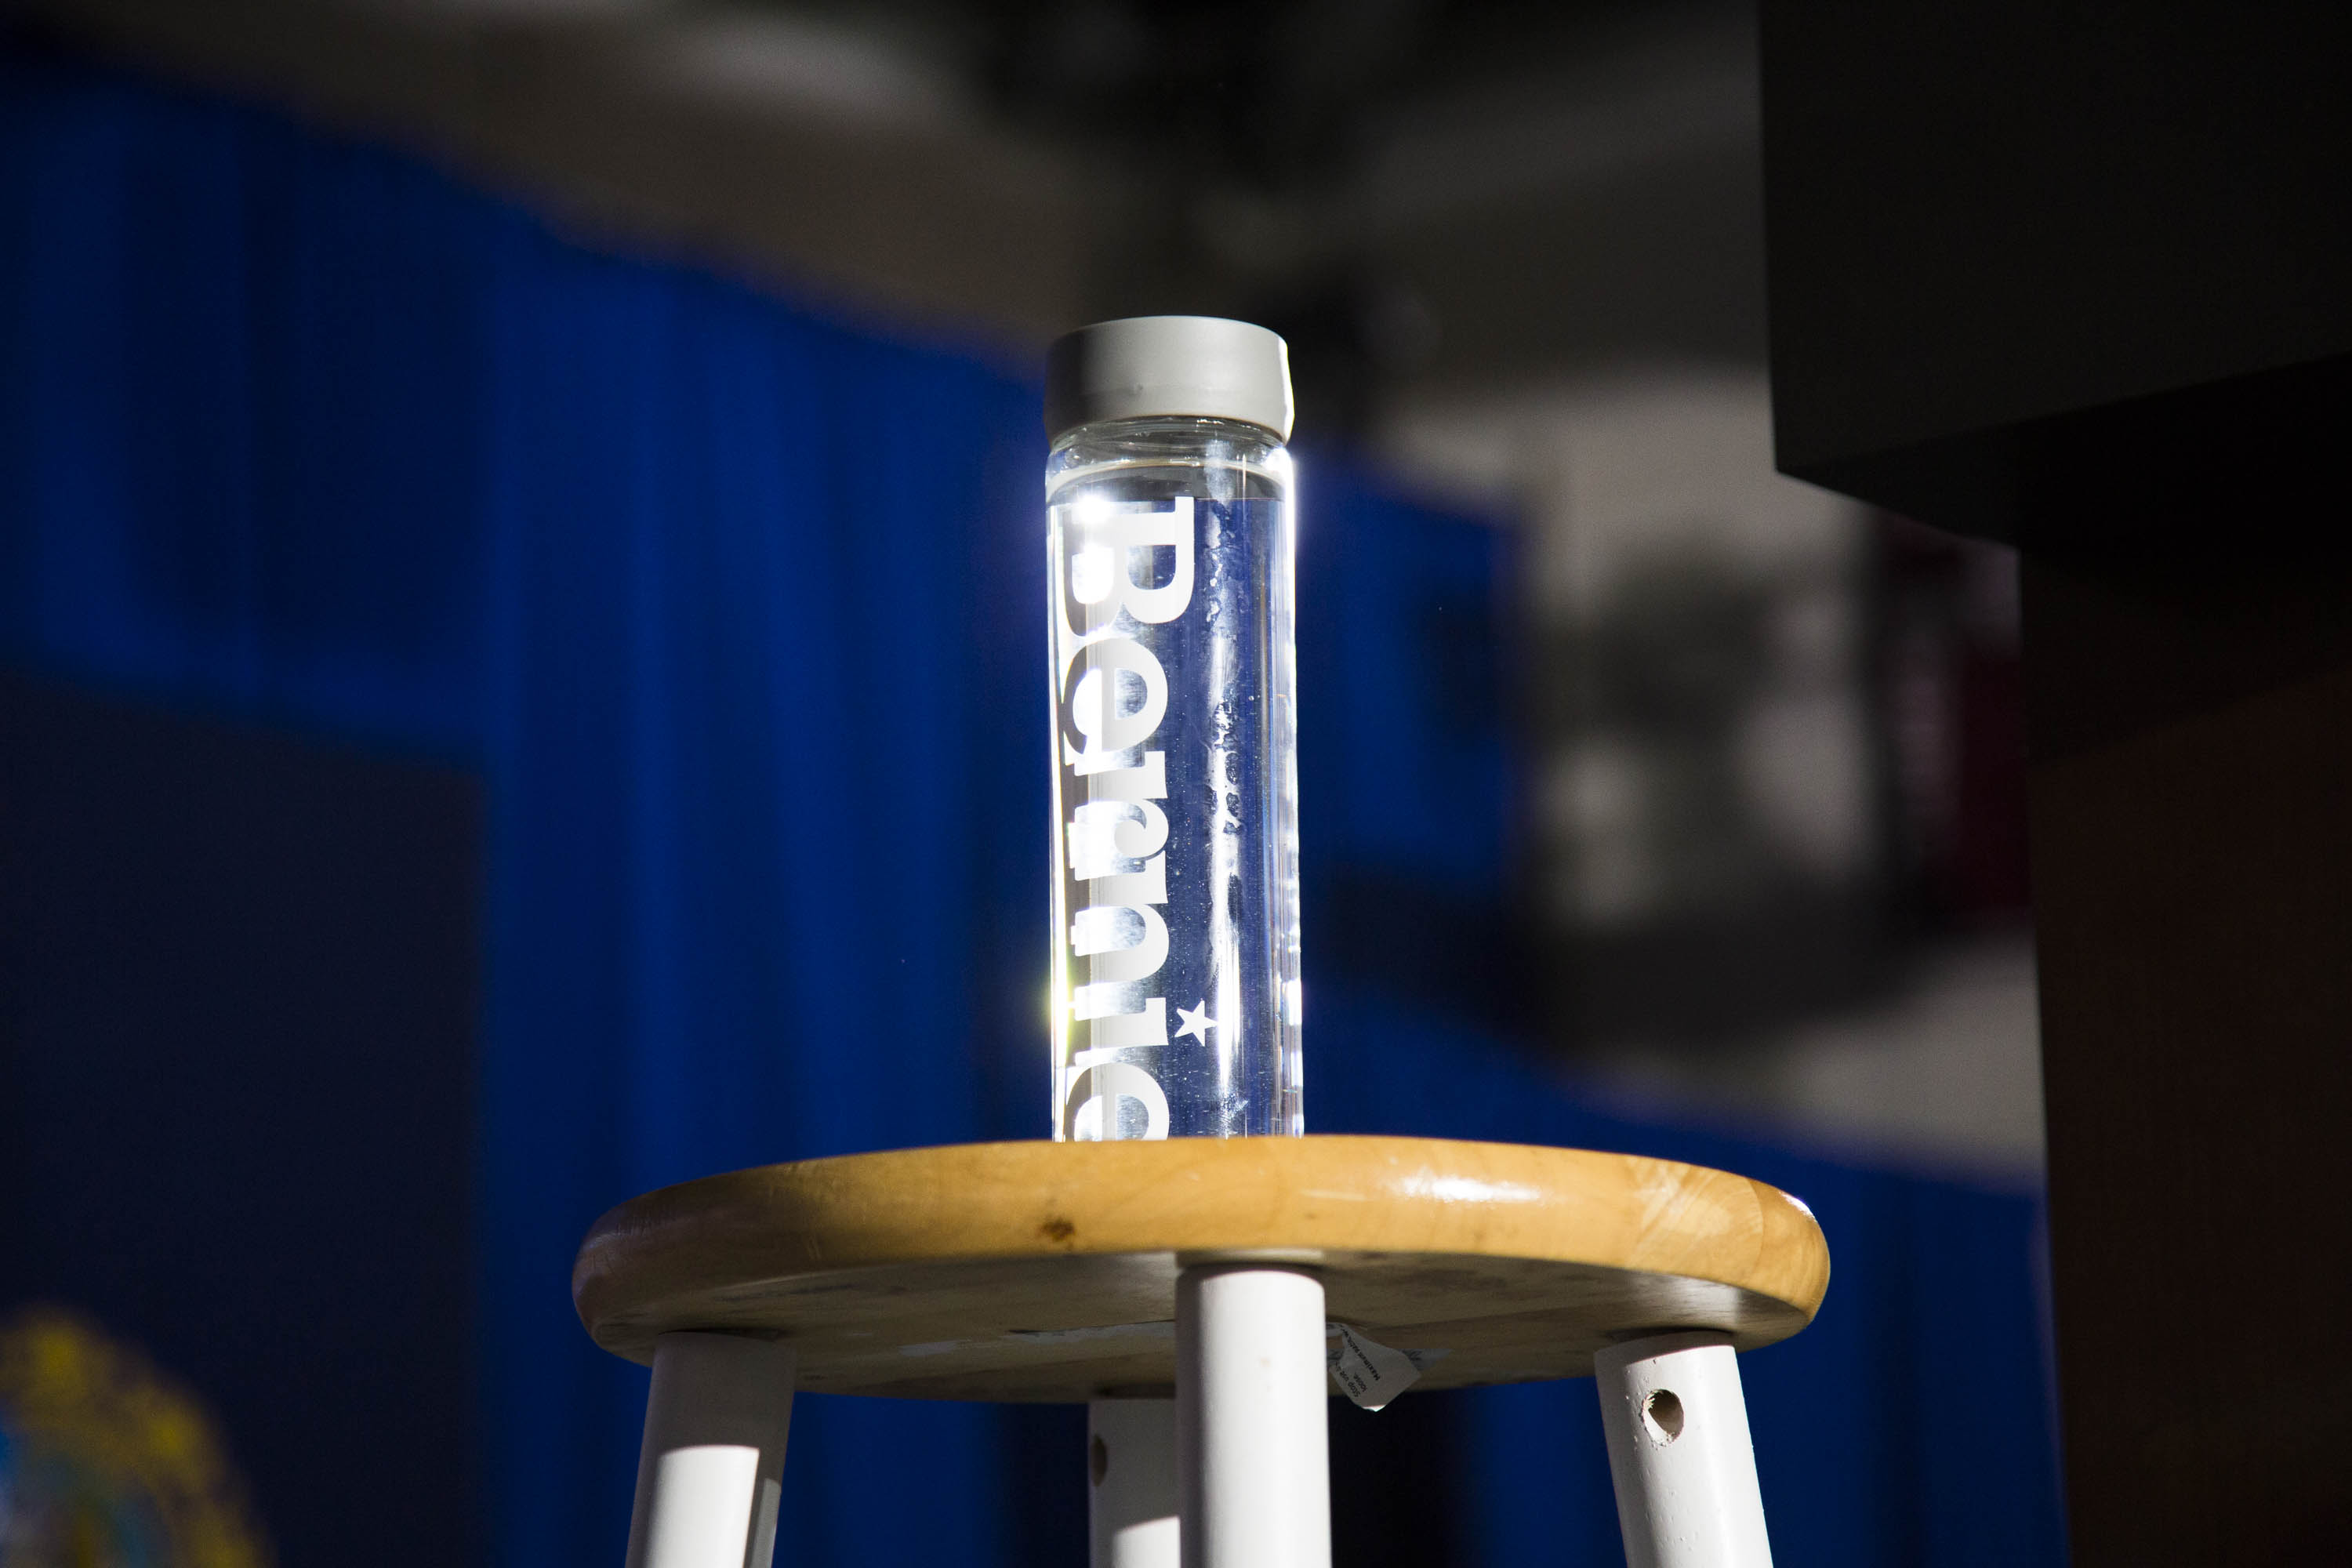 Water belonging to Democratic presidential candidate, Vermont Sen. Bernie Sanders on a stool at a New Hampshire primary night rally at Concord High School on Feb. 9, 2016, in Concord, N.H.